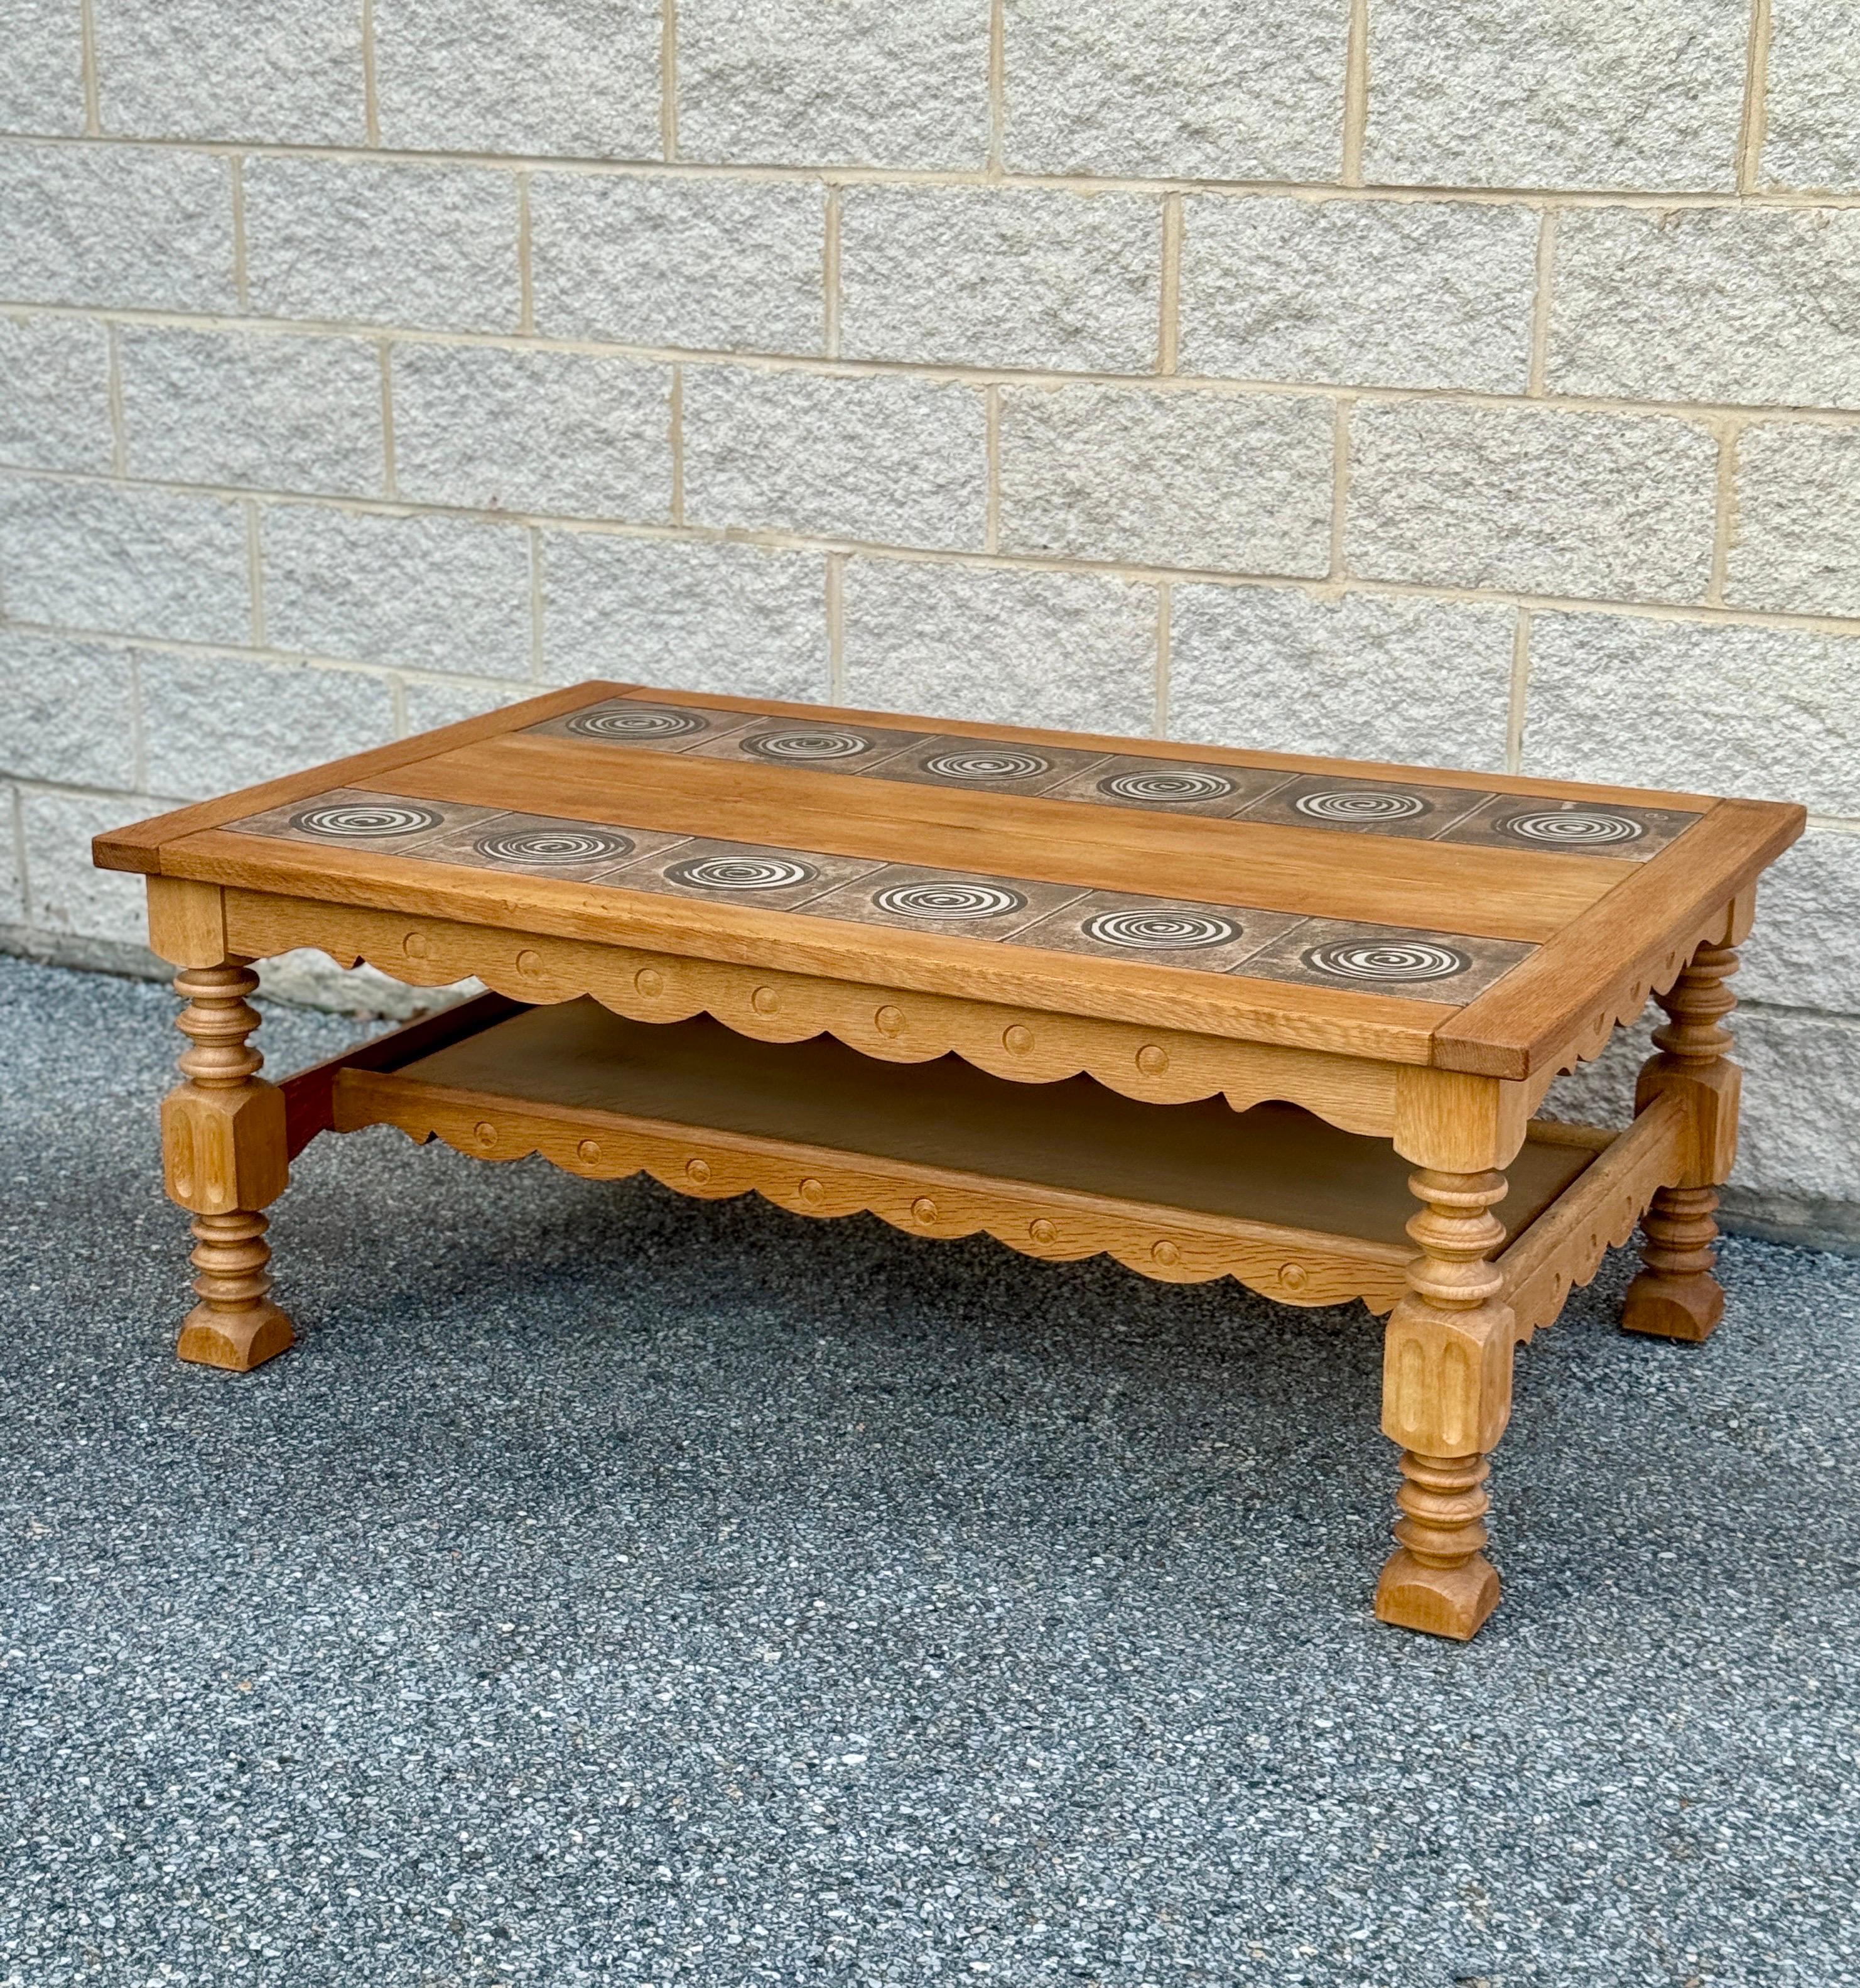 Large Vintage Danish Oak Tile Top Coffee Table In Good Condition For Sale In Elkton, MD